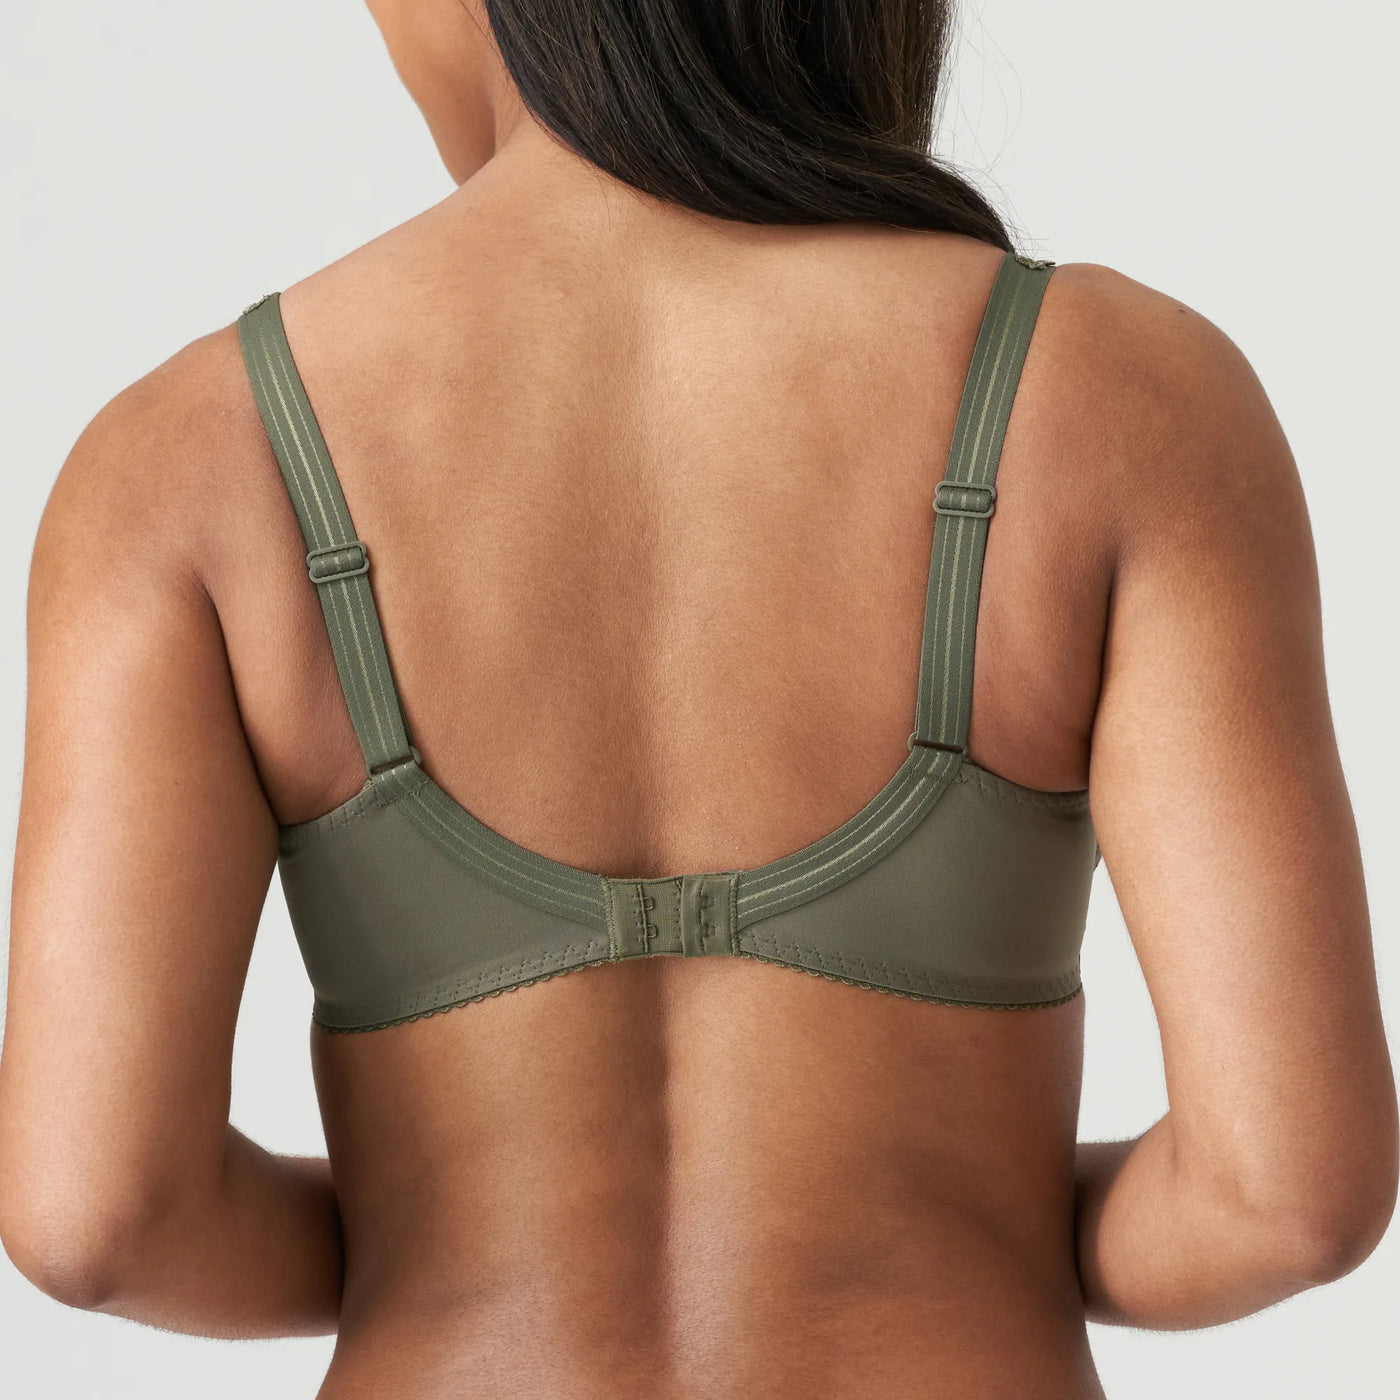 Primadonna Deauville full cup bra Paradise Green